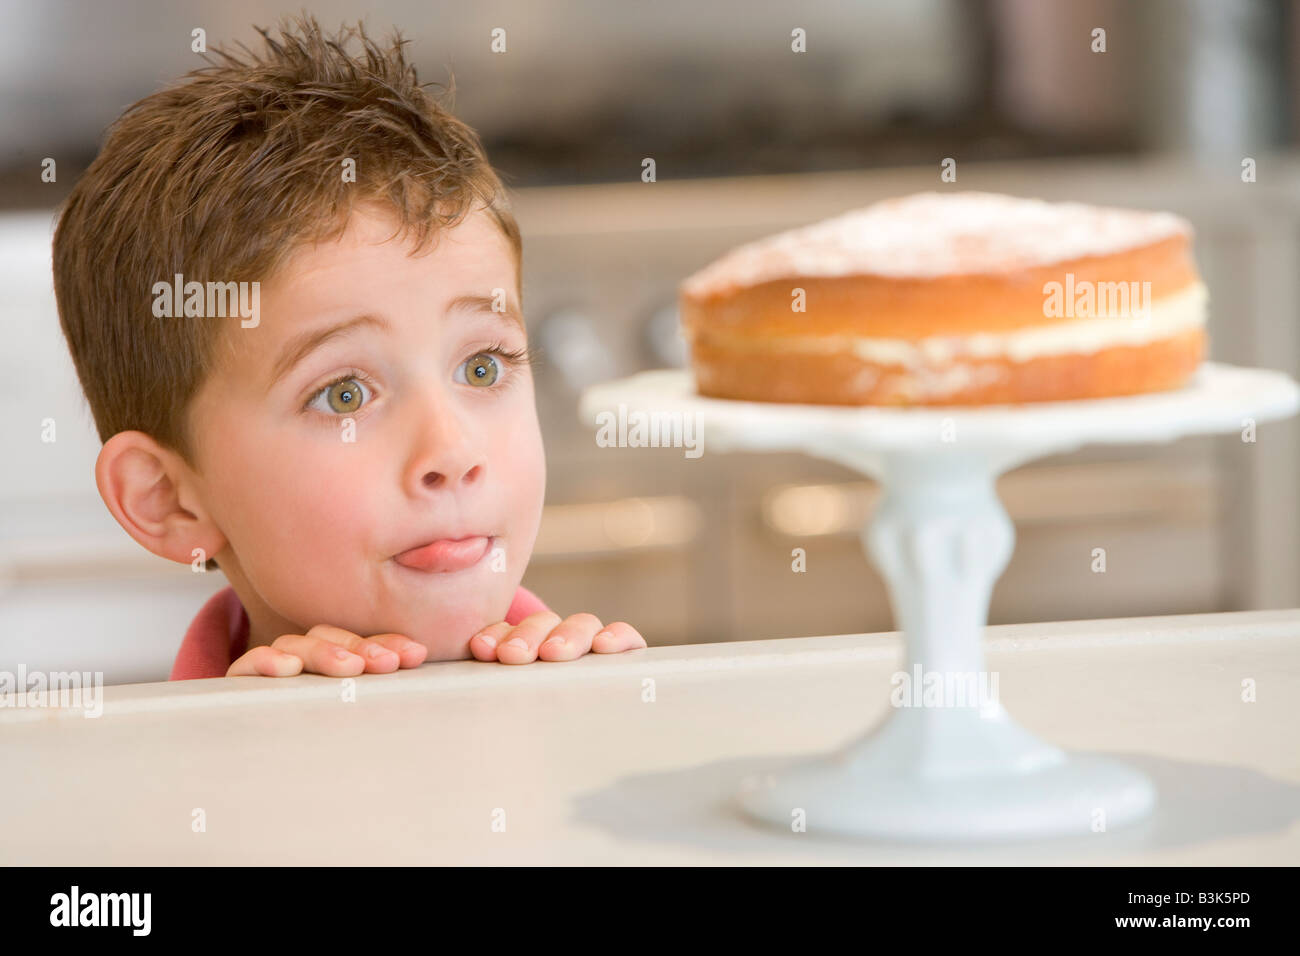 Young boy in kitchen looking at cake on counter Stock Photo